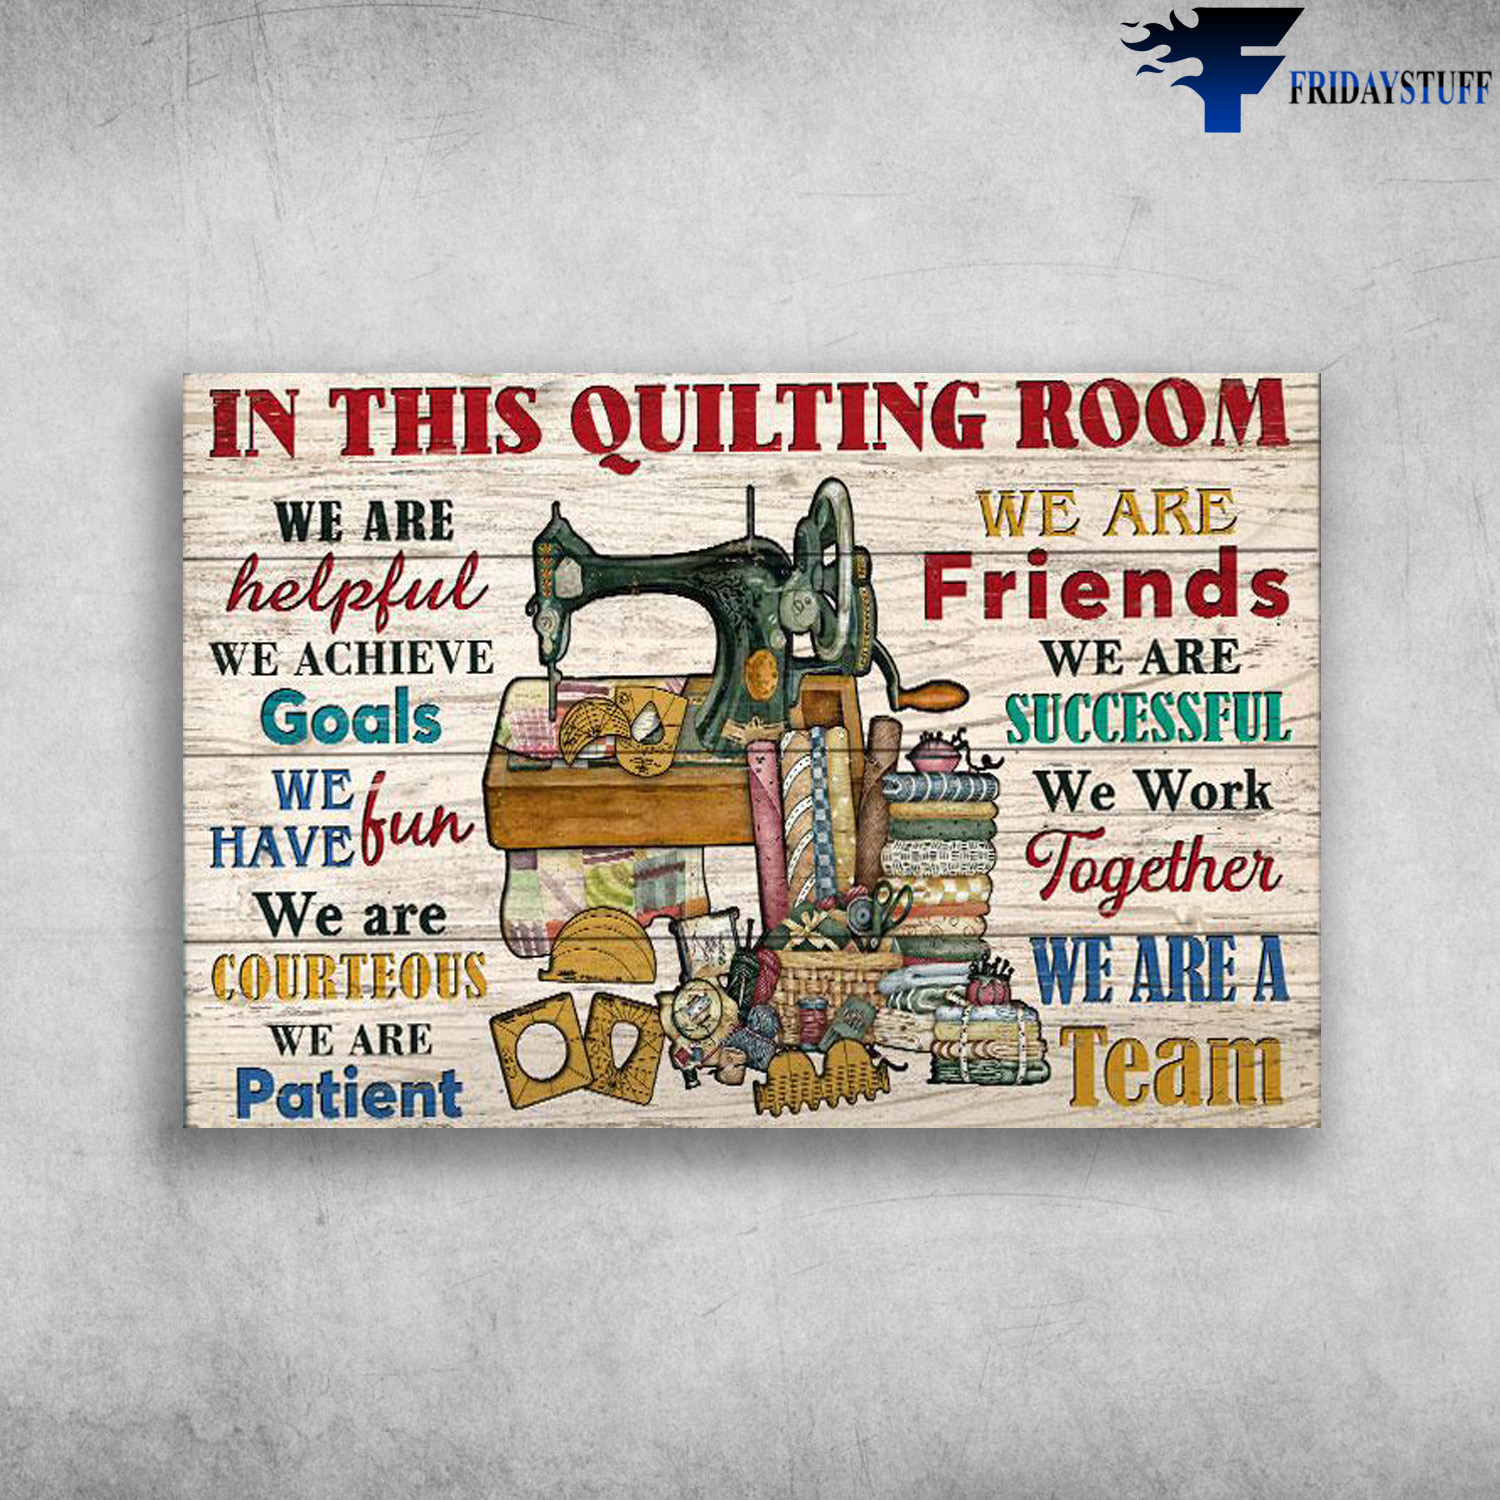 Sewing Machine - In This Quilting Room, We Are Helpful, We Achive Goals, We Have Fun, We Are Courteous, We Are Patient, We Are Friends, We Are Successful, We Work Together, We Are A Team